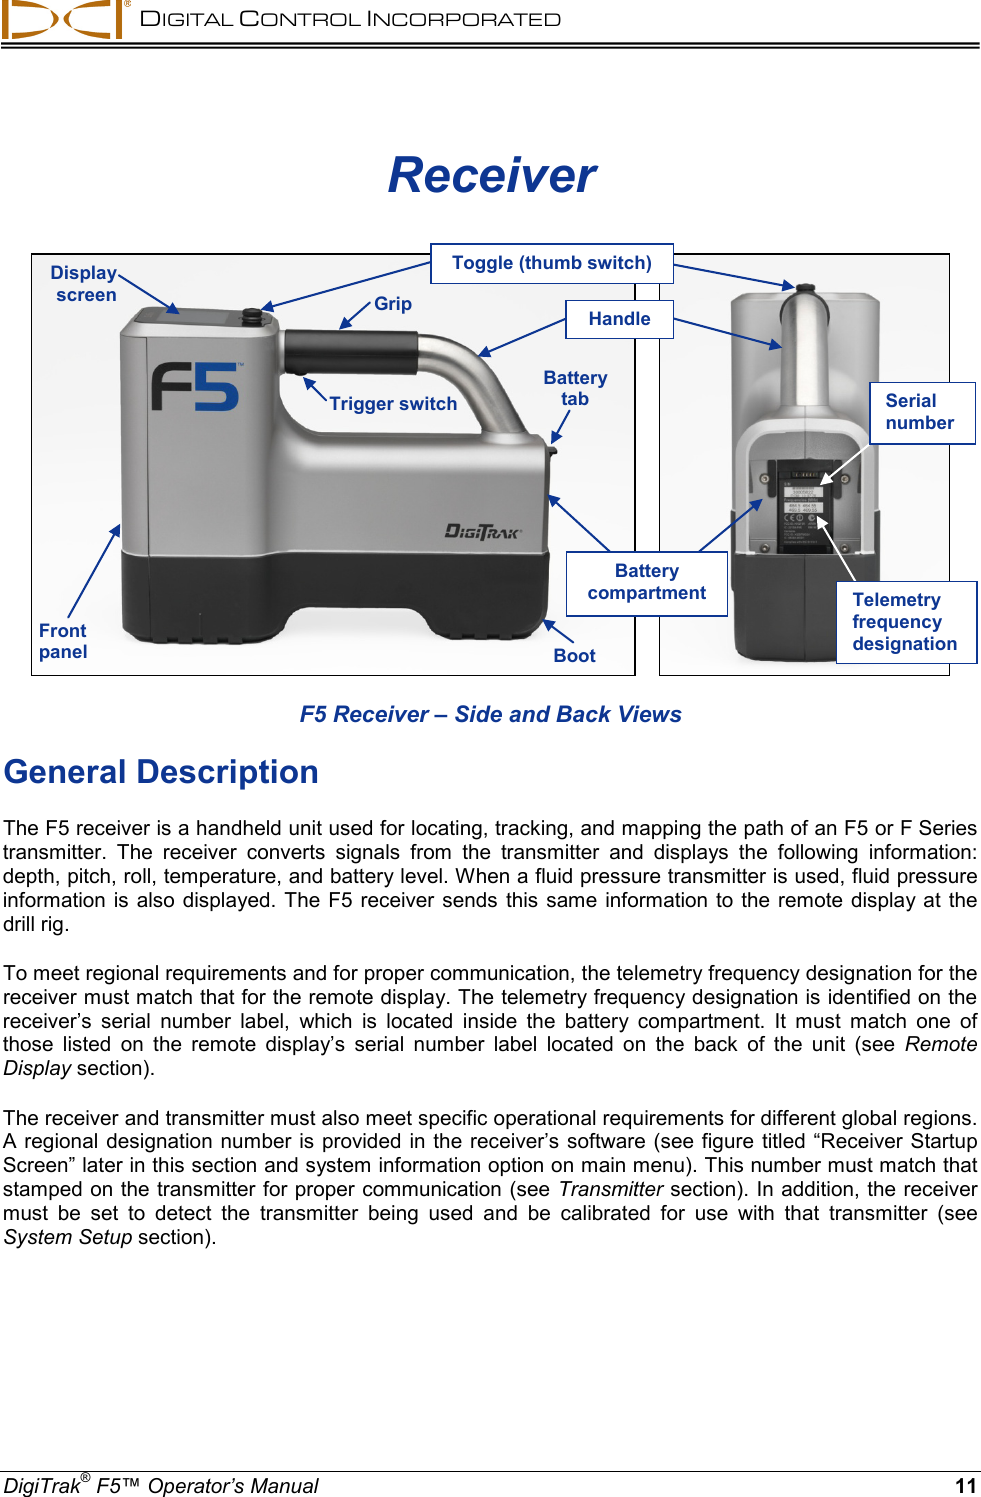  DIGITAL CONTROL INCORPORATED  DigiTrak® F5™ Operator’s Manual 11 Receiver       F5 Receiver – Side and Back Views General Description The F5 receiver is a handheld unit used for locating, tracking, and mapping the path of an F5 or F Series transmitter.  The receiver converts signals from the transmitter and displays the following information: depth, pitch, roll, temperature, and battery level. When a fluid pressure transmitter is used, fluid pressure information is also displayed.  The F5 receiver  sends  this same information to the remote display at the drill rig.  To meet regional requirements and for proper communication, the telemetry frequency designation for the receiver must match that for the remote display. The telemetry frequency designation is identified on the receiver’s  serial number label, which is located inside the battery compartment. It must match one of those listed on the remote display’s serial number label located on the back of the unit (see Remote Display section). The receiver and transmitter must also meet specific operational requirements for different global regions. A regional designation number is provided in the receiver’s software (see figure titled “Receiver Startup Screen” later in this section and system information option on main menu). This number must match that stamped on the transmitter for proper communication (see Transmitter section). In addition, the receiver must be set to detect the transmitter  being used and be calibrated for use with that  transmitter (see System Setup section). Trigger switch Front panel Boot Battery tab Display screen Grip Battery compartment Toggle (thumb switch)   Telemetry frequency designation Serial number Handle 